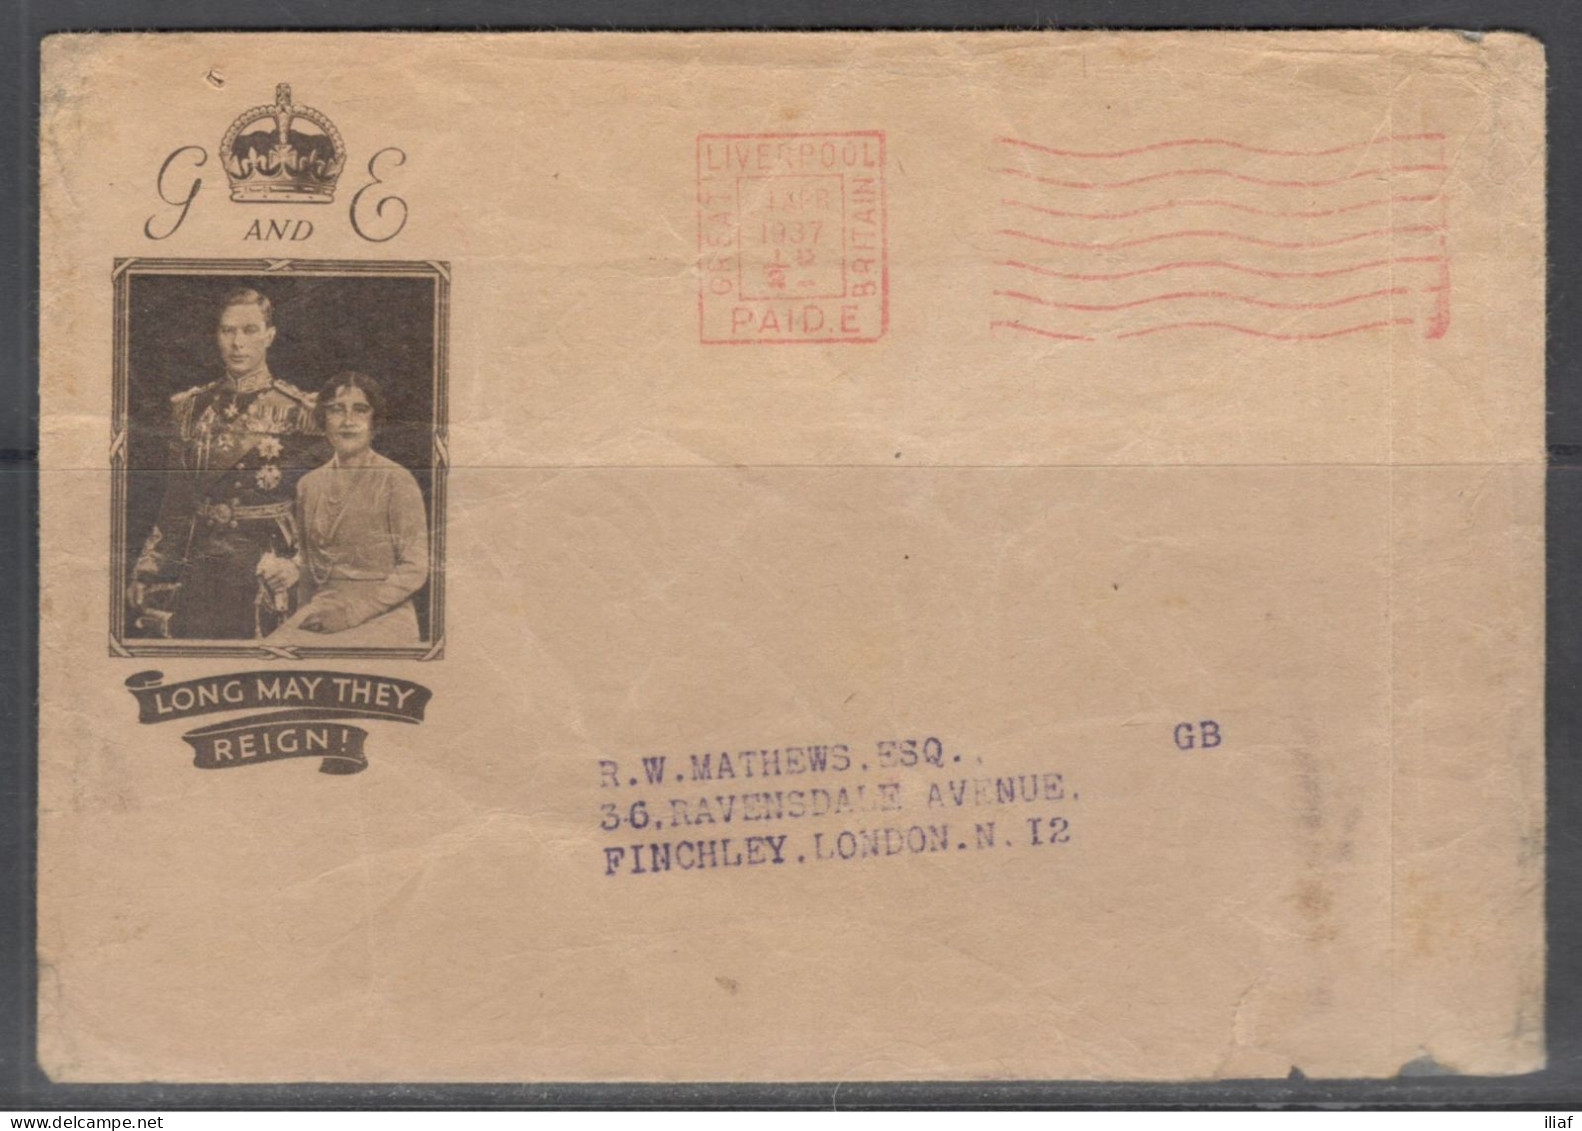 Great Britain - United Kingdom. Metter Cancellation On Letter, Sent From Liverpool On 4.04.1937 To London - Covers & Documents